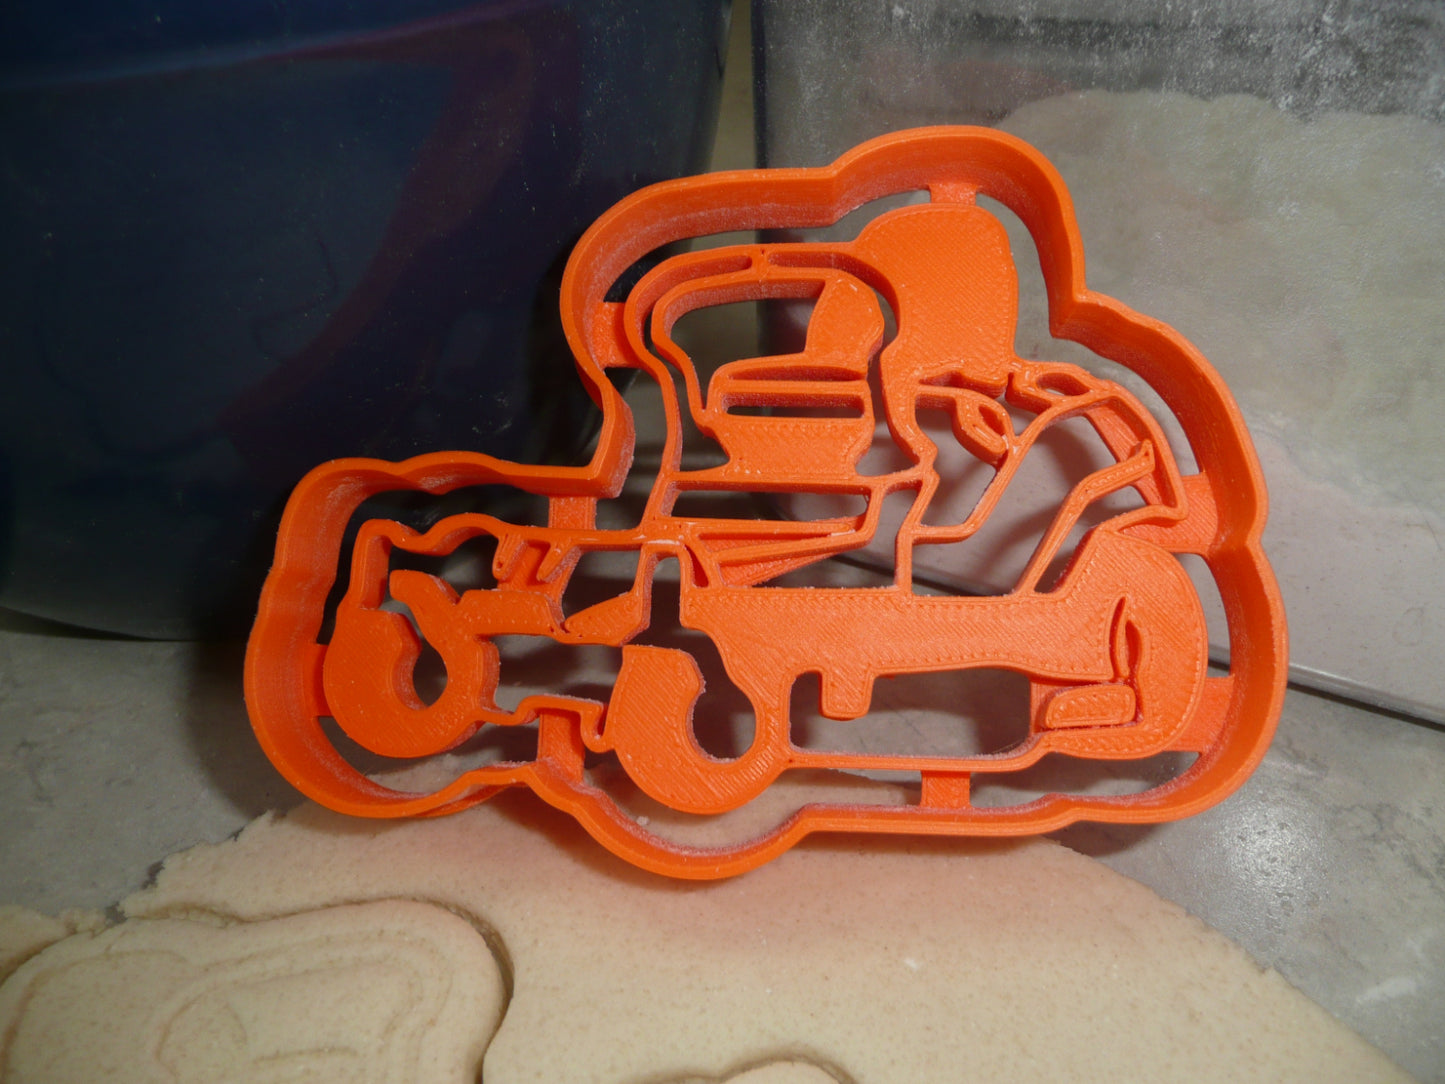 Lawn Mowers Yard Equipment Set Of 3 Cookie Cutters Made In USA PR1648